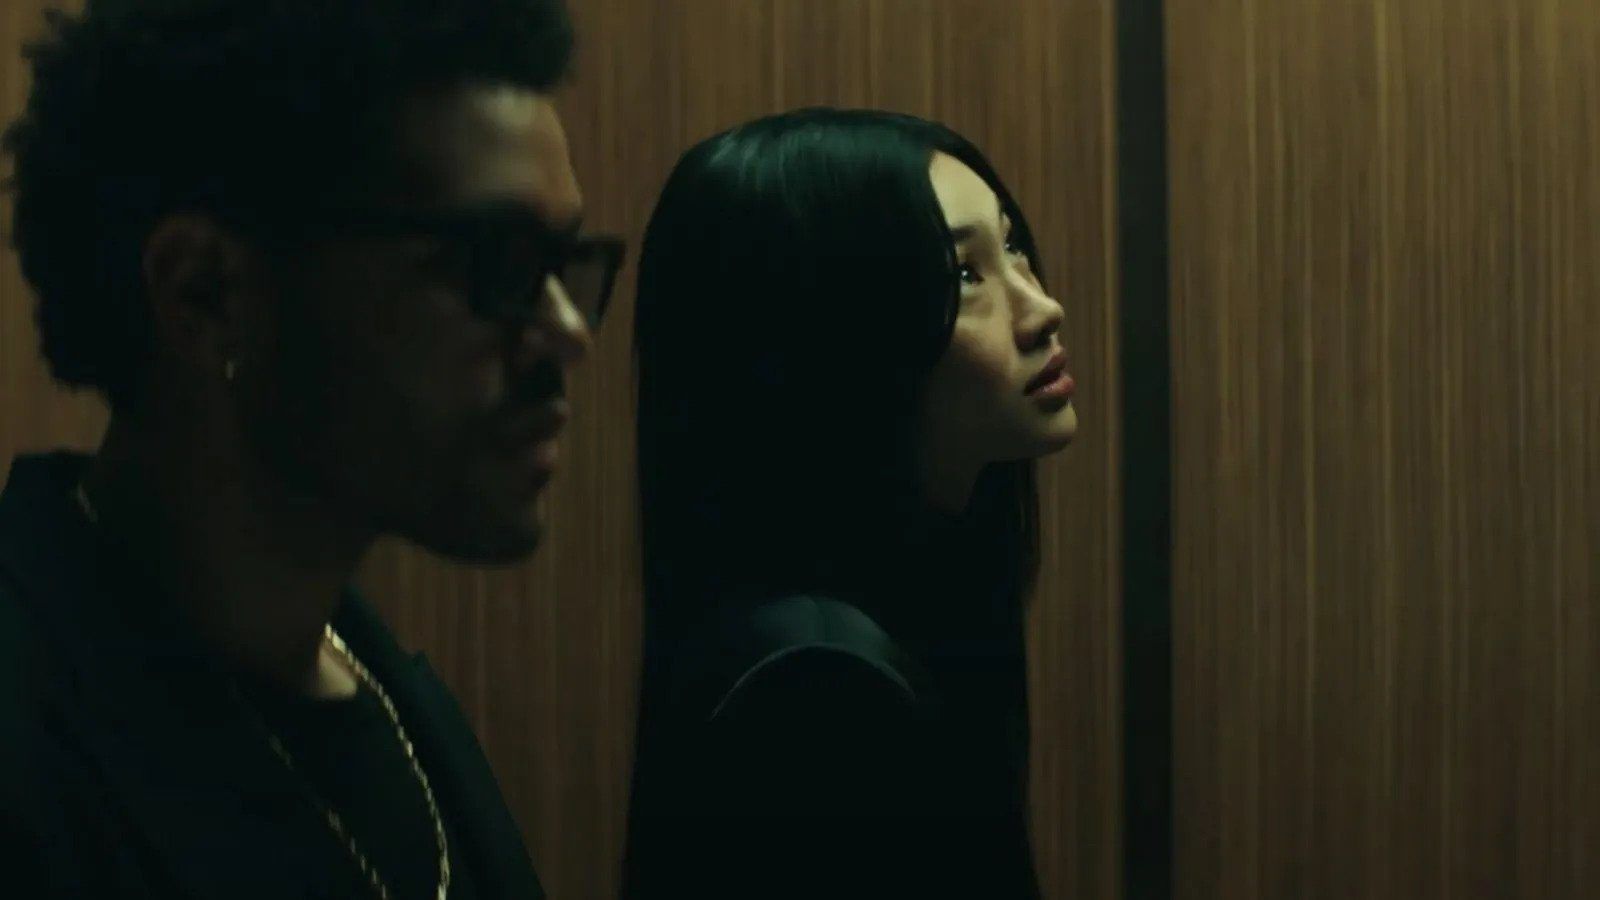 Watch: HoYeon Jung’s music video debut with The Weeknd in “Out of Time”